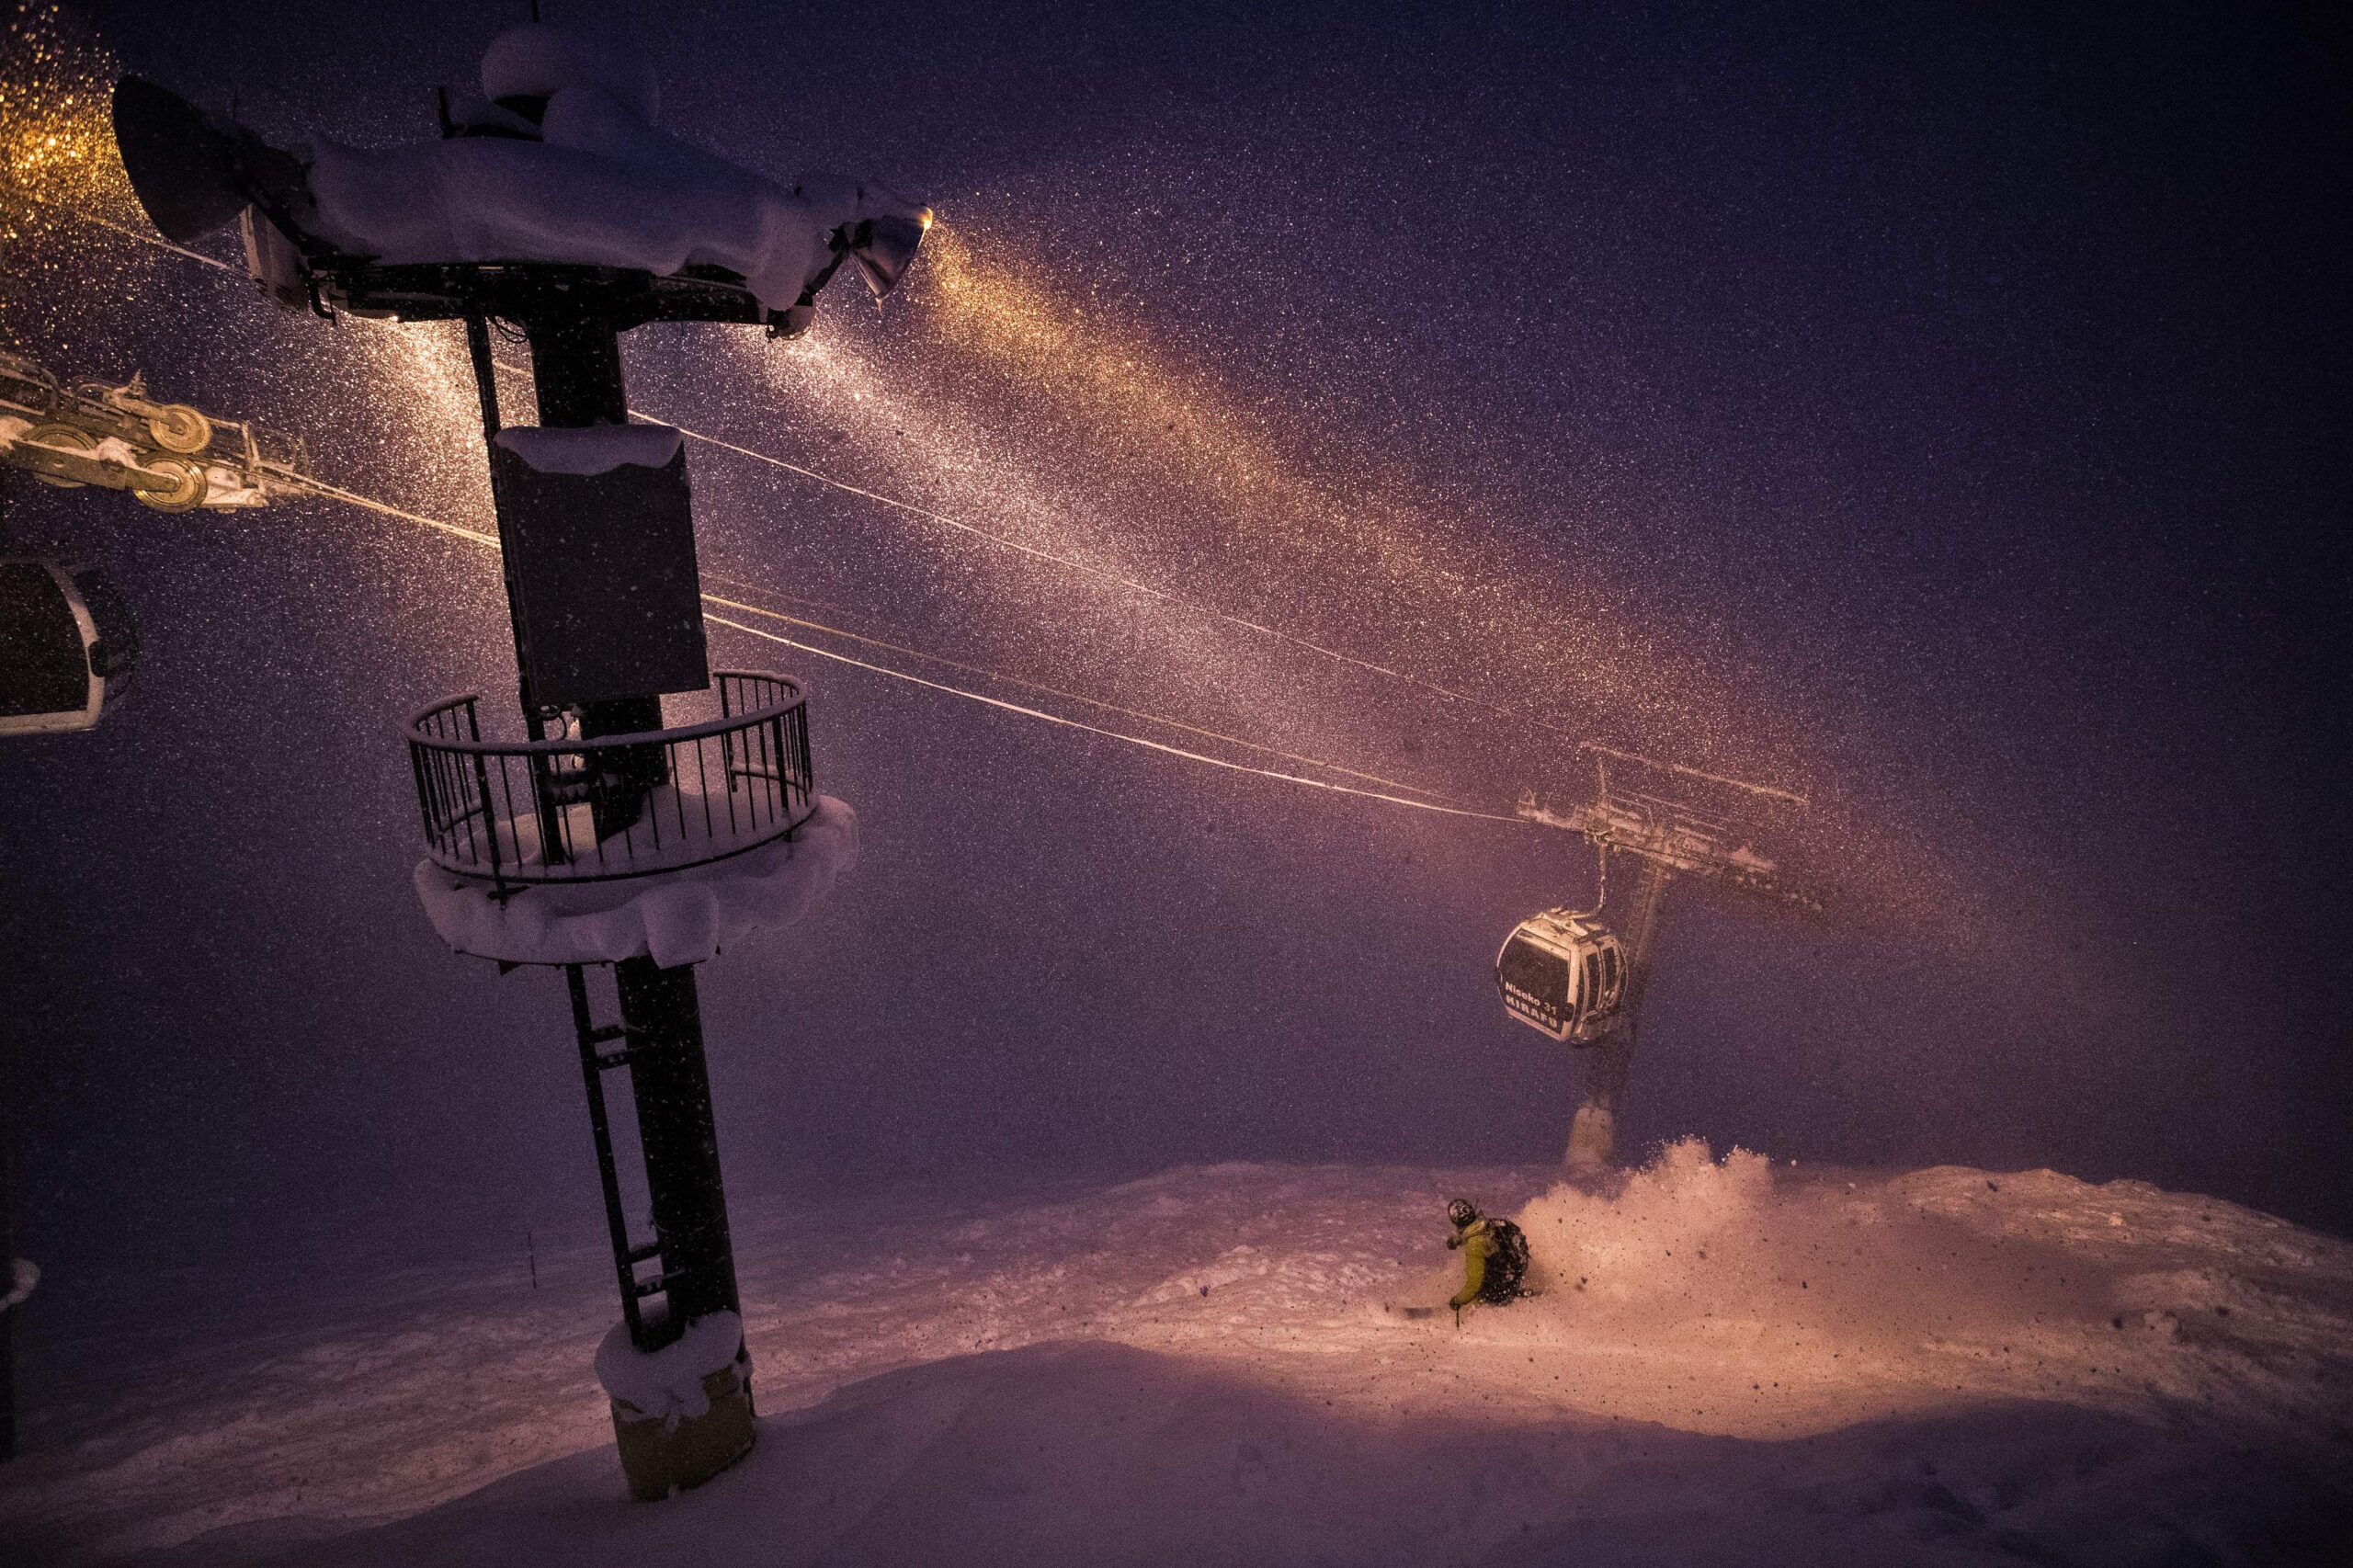 a gondola pylon shines light on wires and gondola beneath, but also on skier in green, night skiing off piste, under the lift line